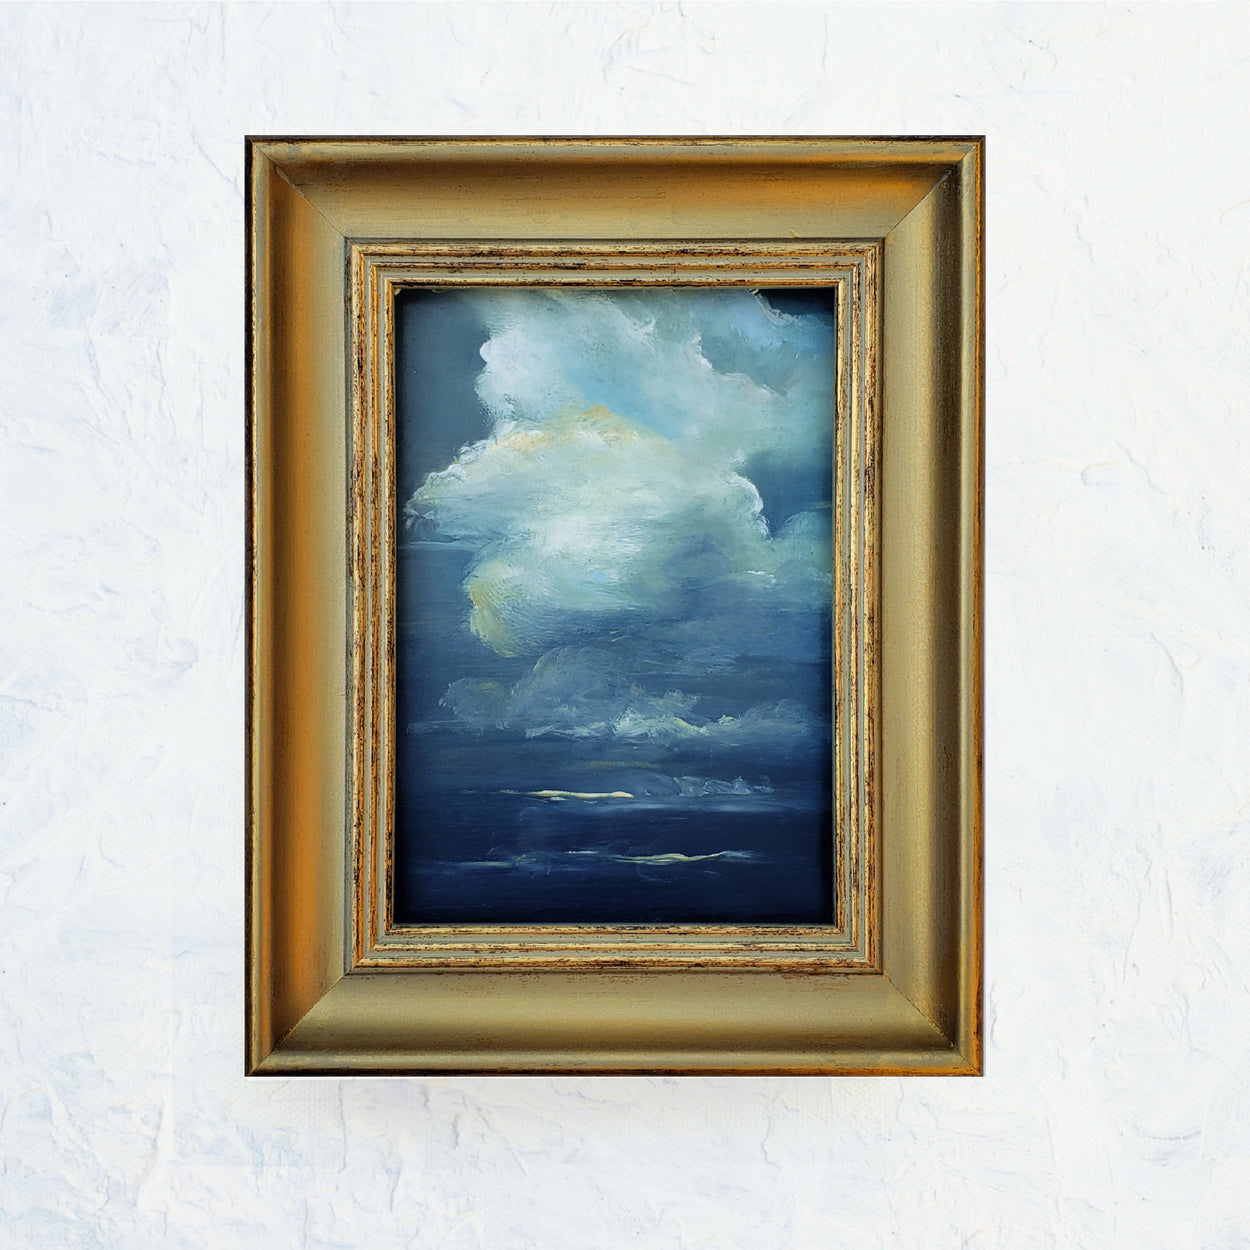 5x7 oil on oil paper... dramatic dark blue gray sky with beautiful puffy white and golden clouds. Framed in gold vintage style frame